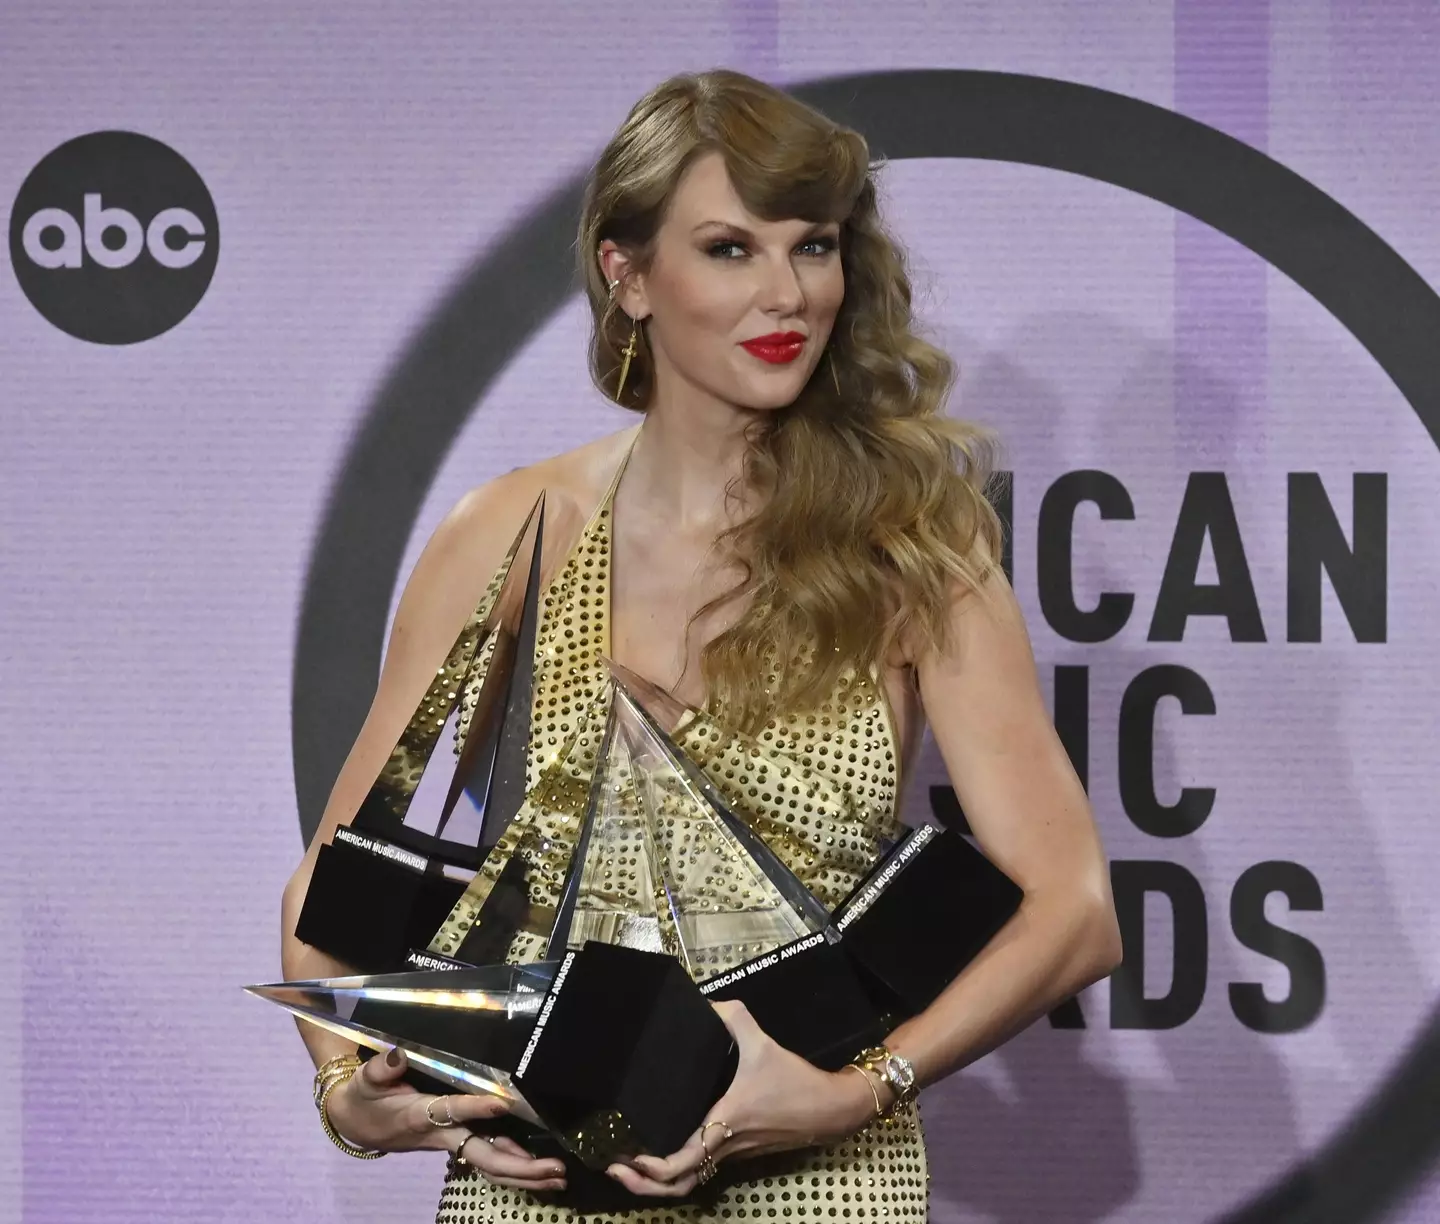 Taylor Swift has picked up buckets of awards.